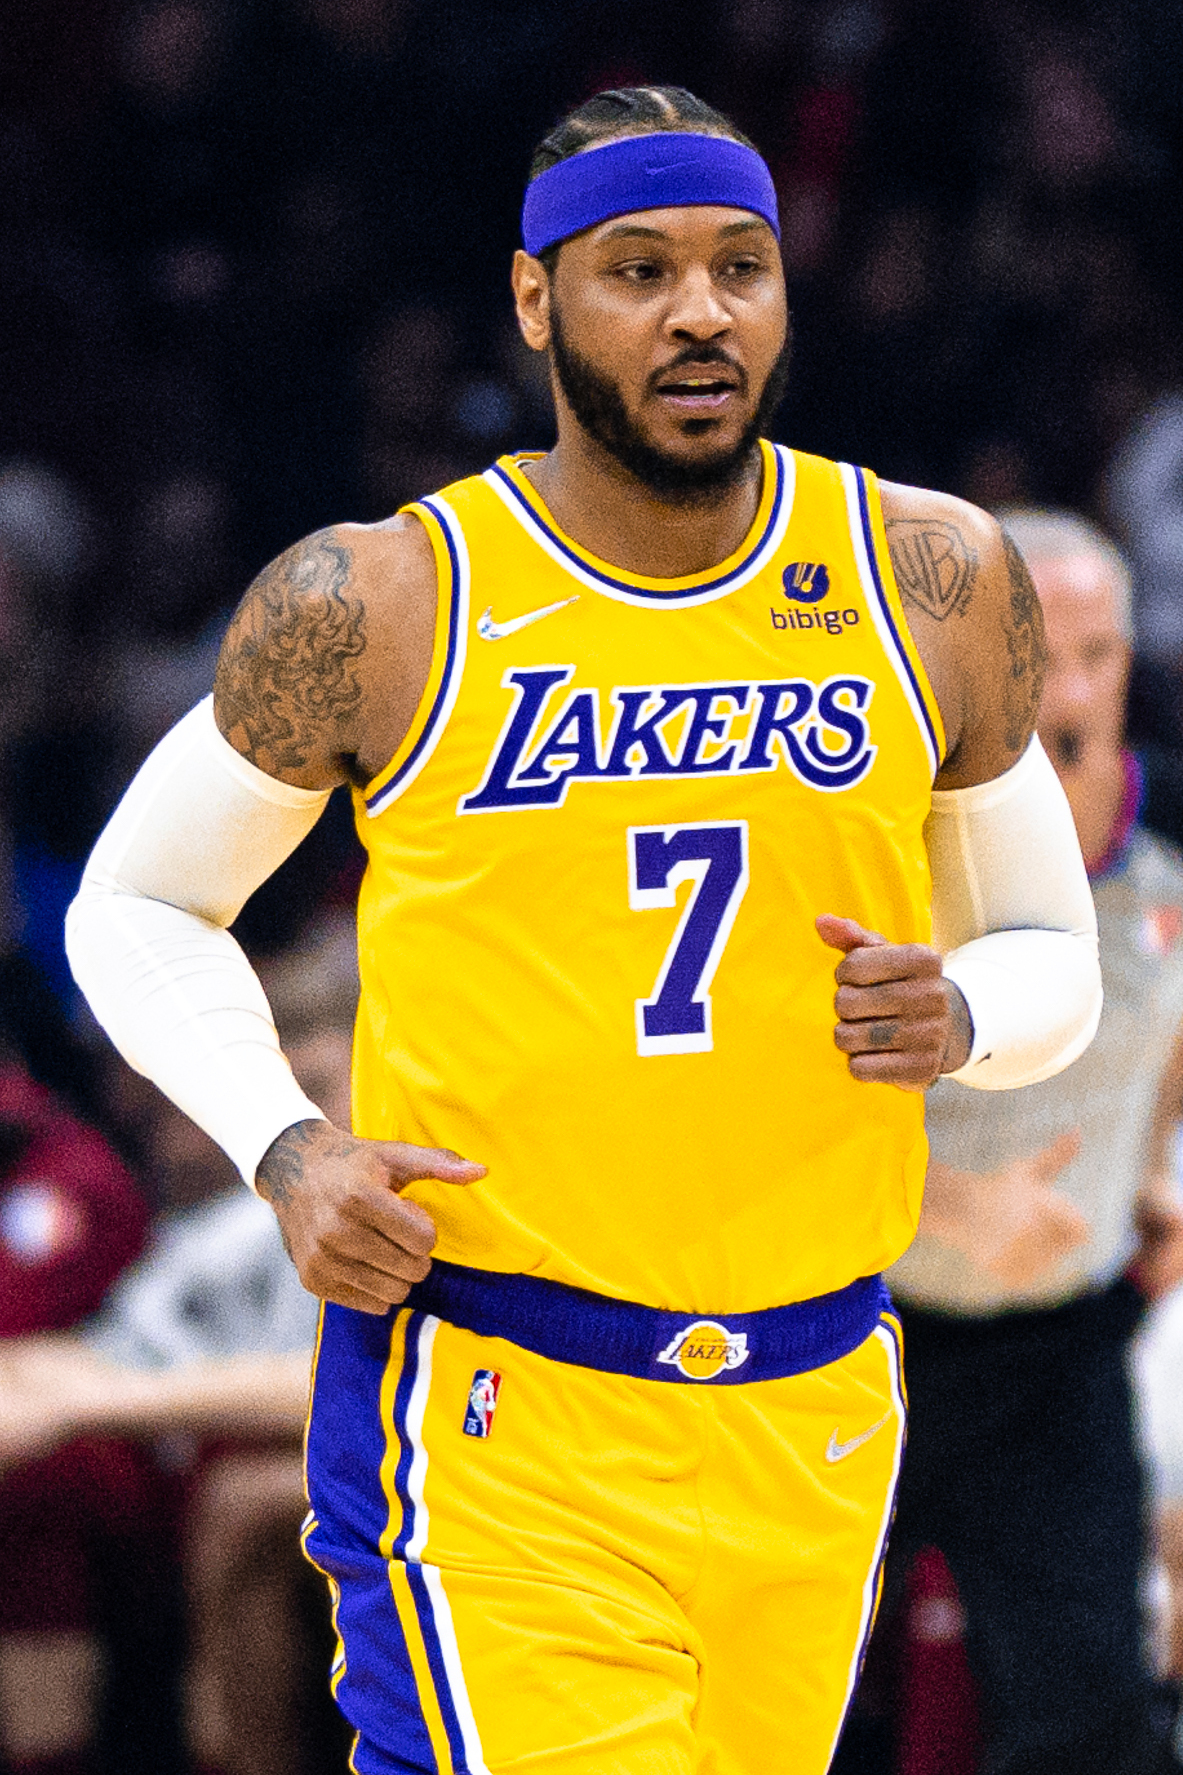 carmelo anthony jersey number nuggets